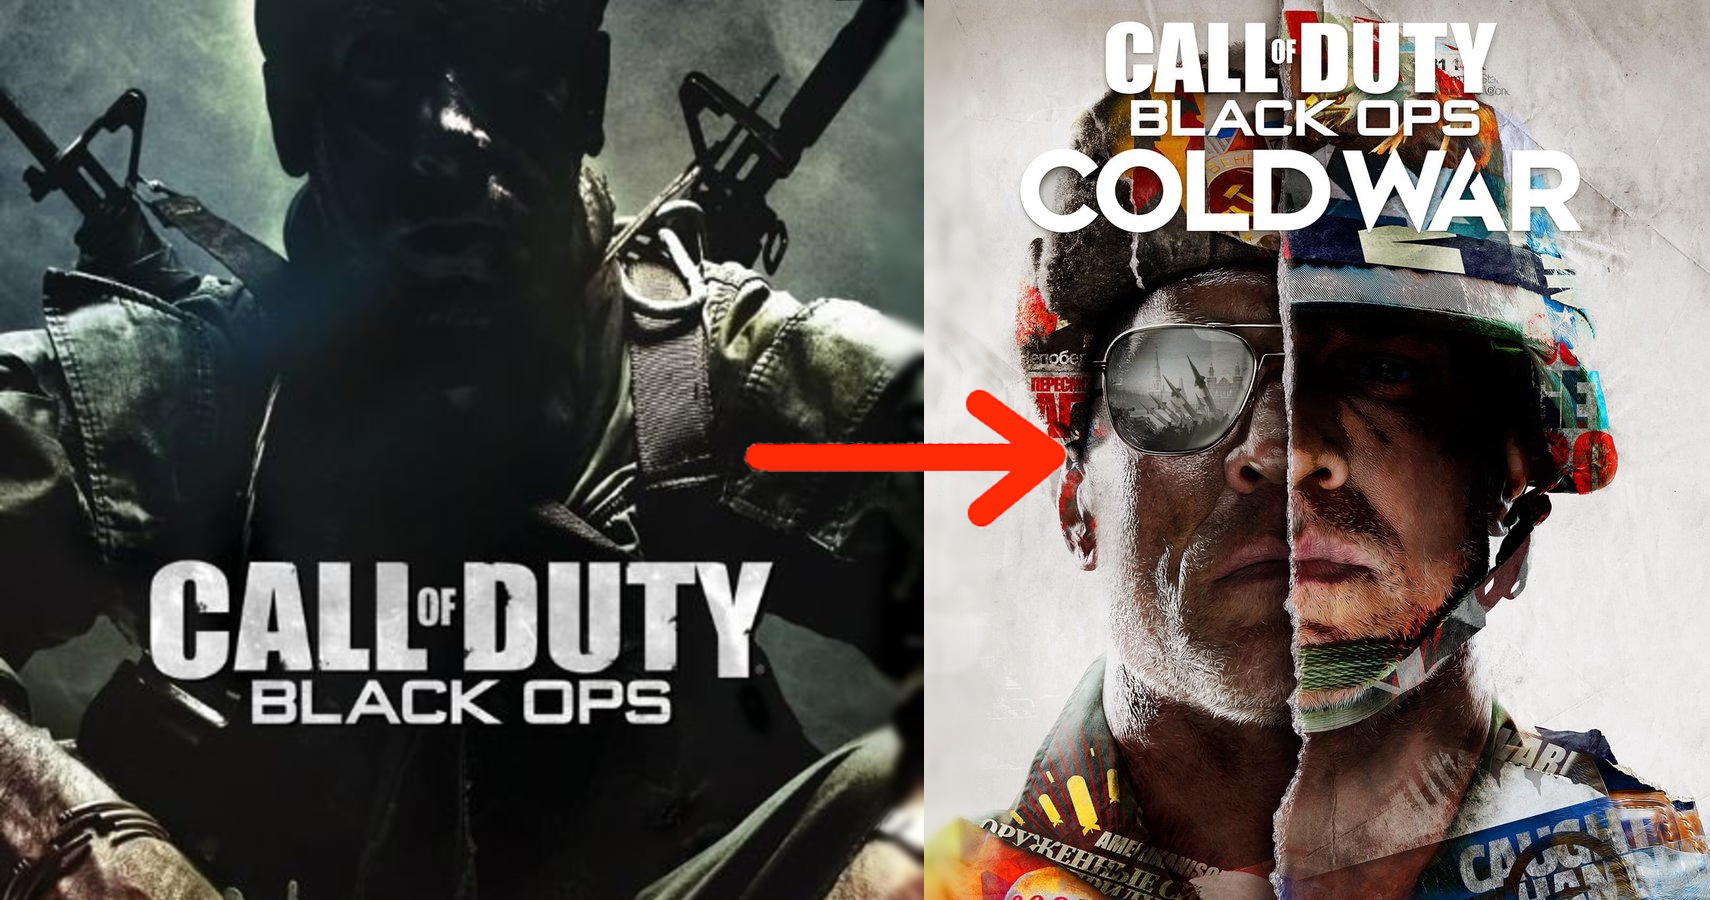 Black Ops 1 and Black Ops Cold War are related to each other.